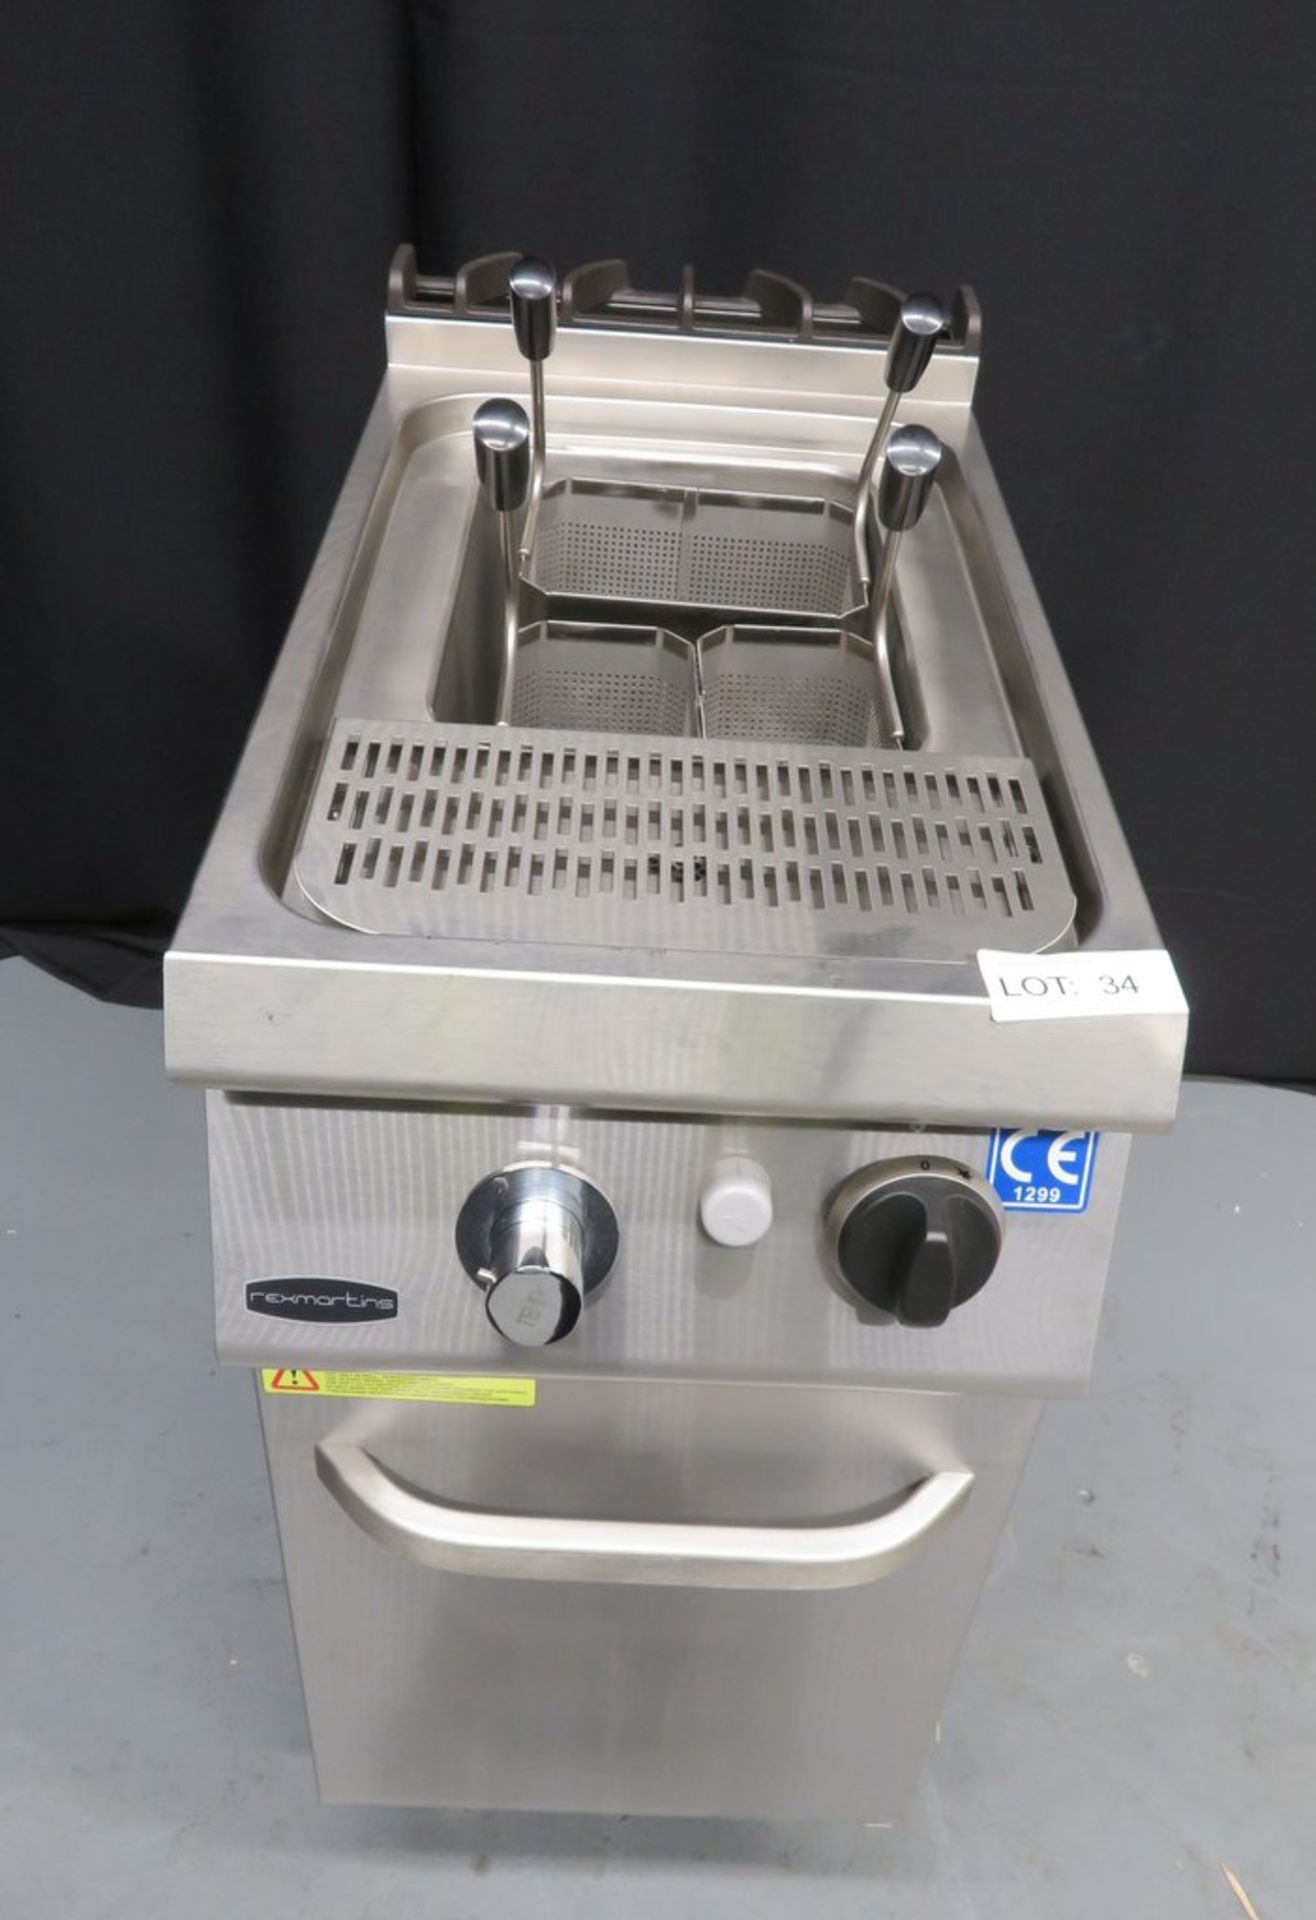 Heavy duty pasta cooker with cupboard, model RG7M100G, gas, brand new & boxed - Image 2 of 9